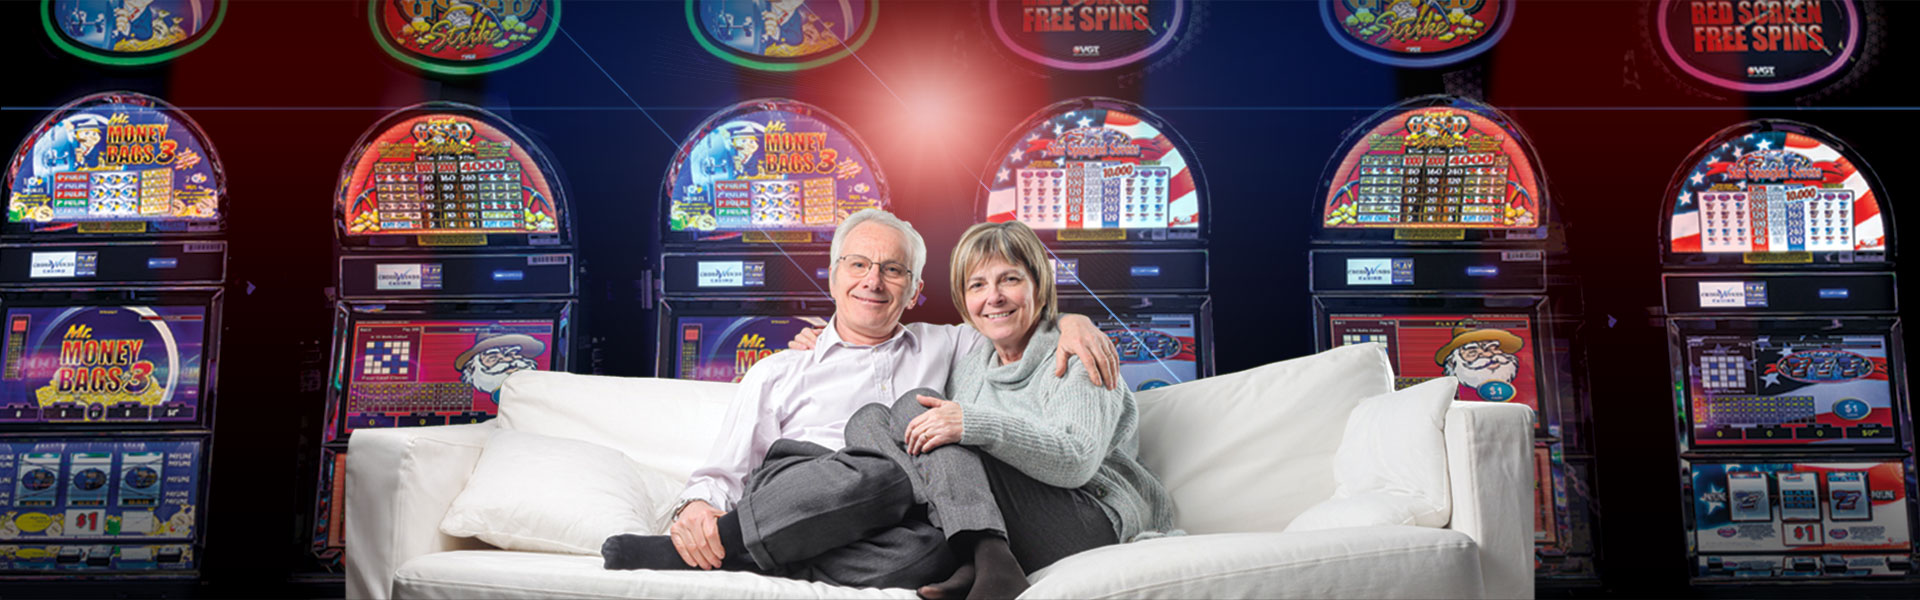 Couple on couch in front of slot machines